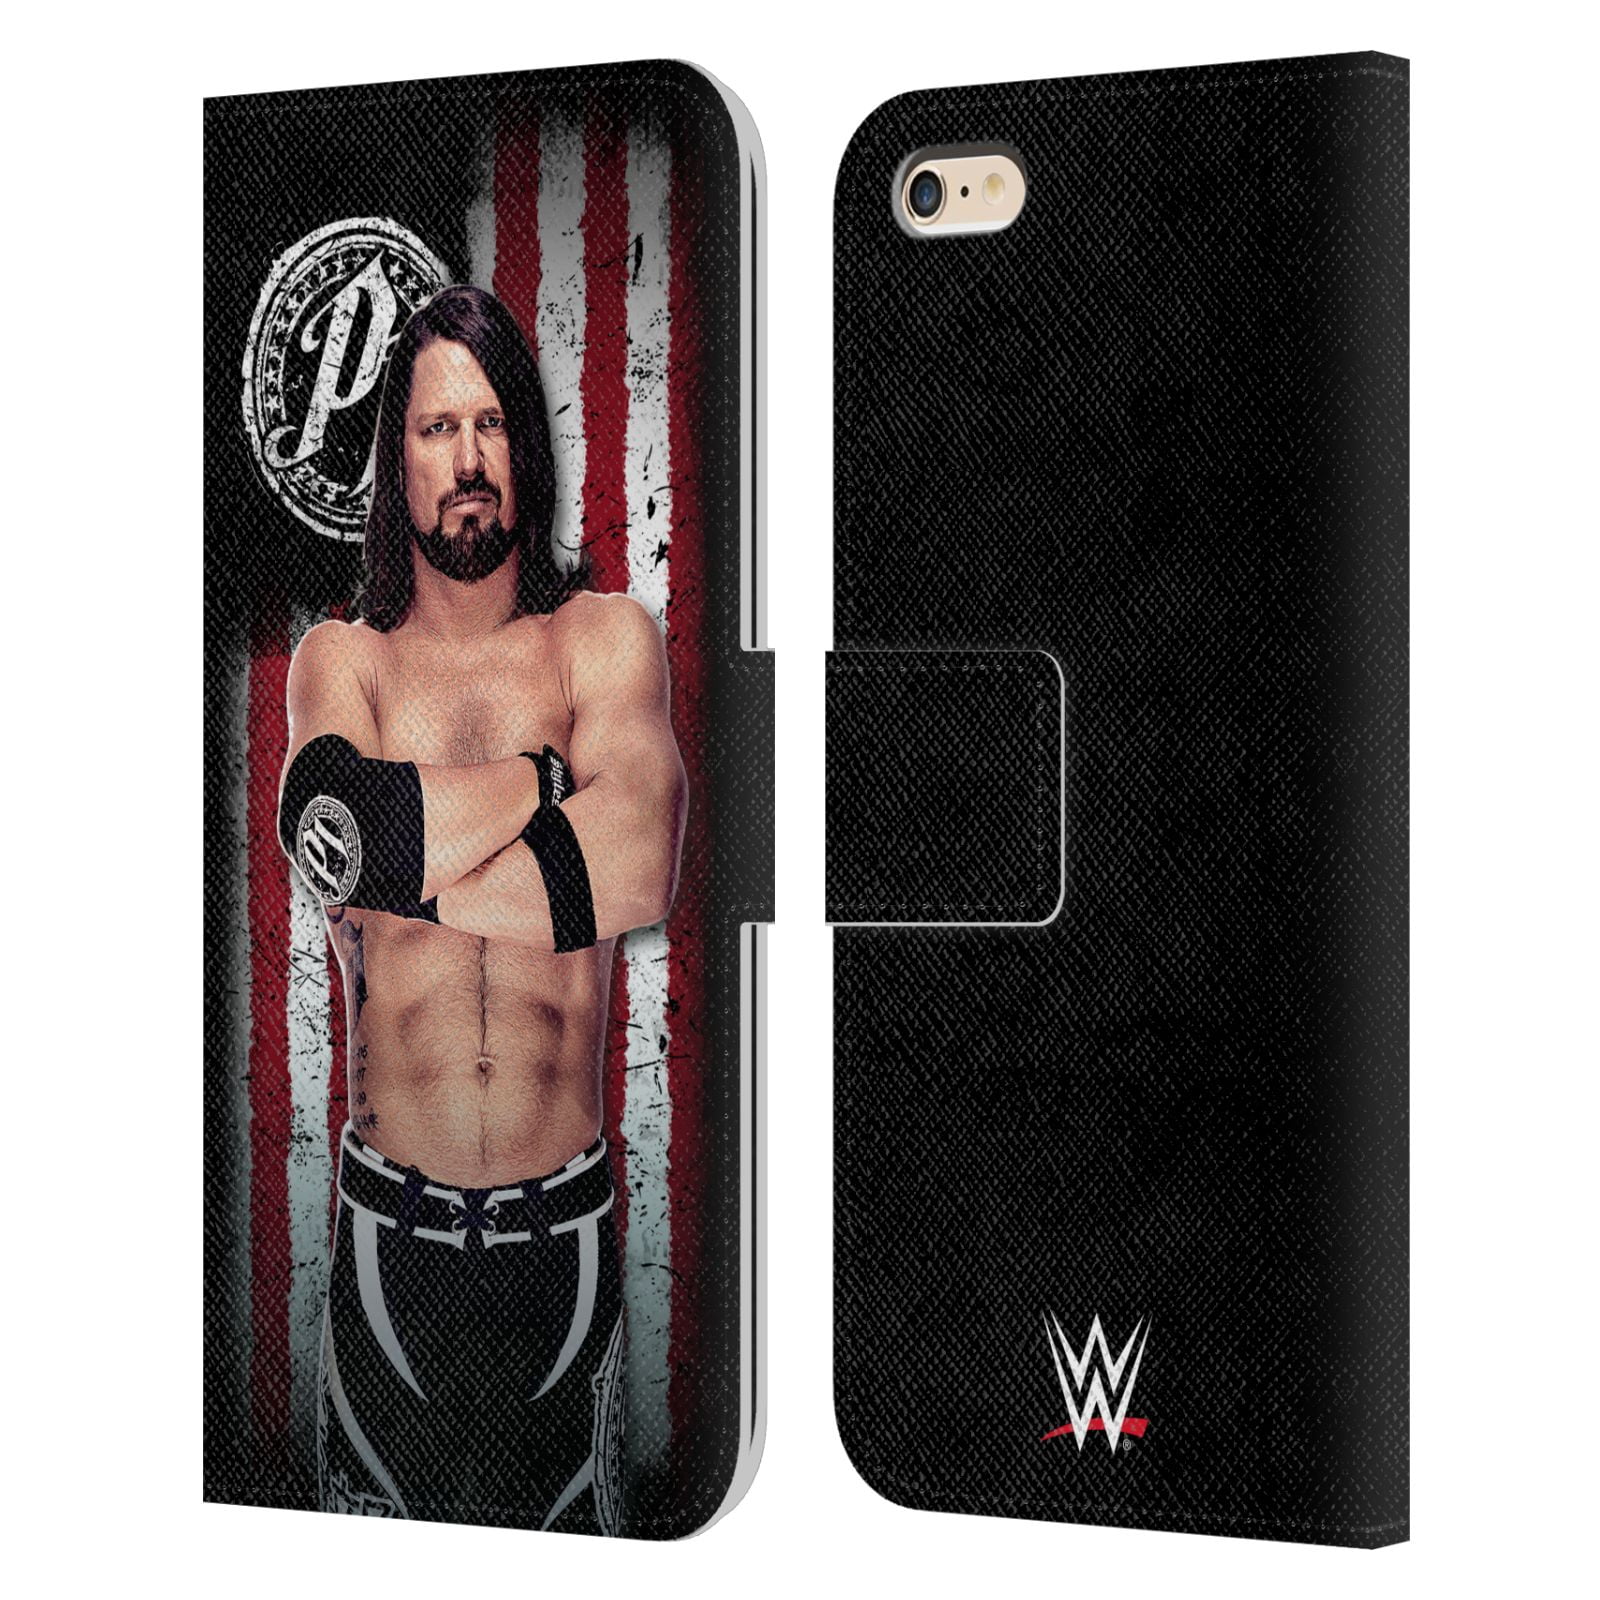 2017 Head Case Designs Officially Licensed WWE AJ Styles Superstars Leather Book Wallet Case Cover Compatible with Apple iPad Pro 10.5 